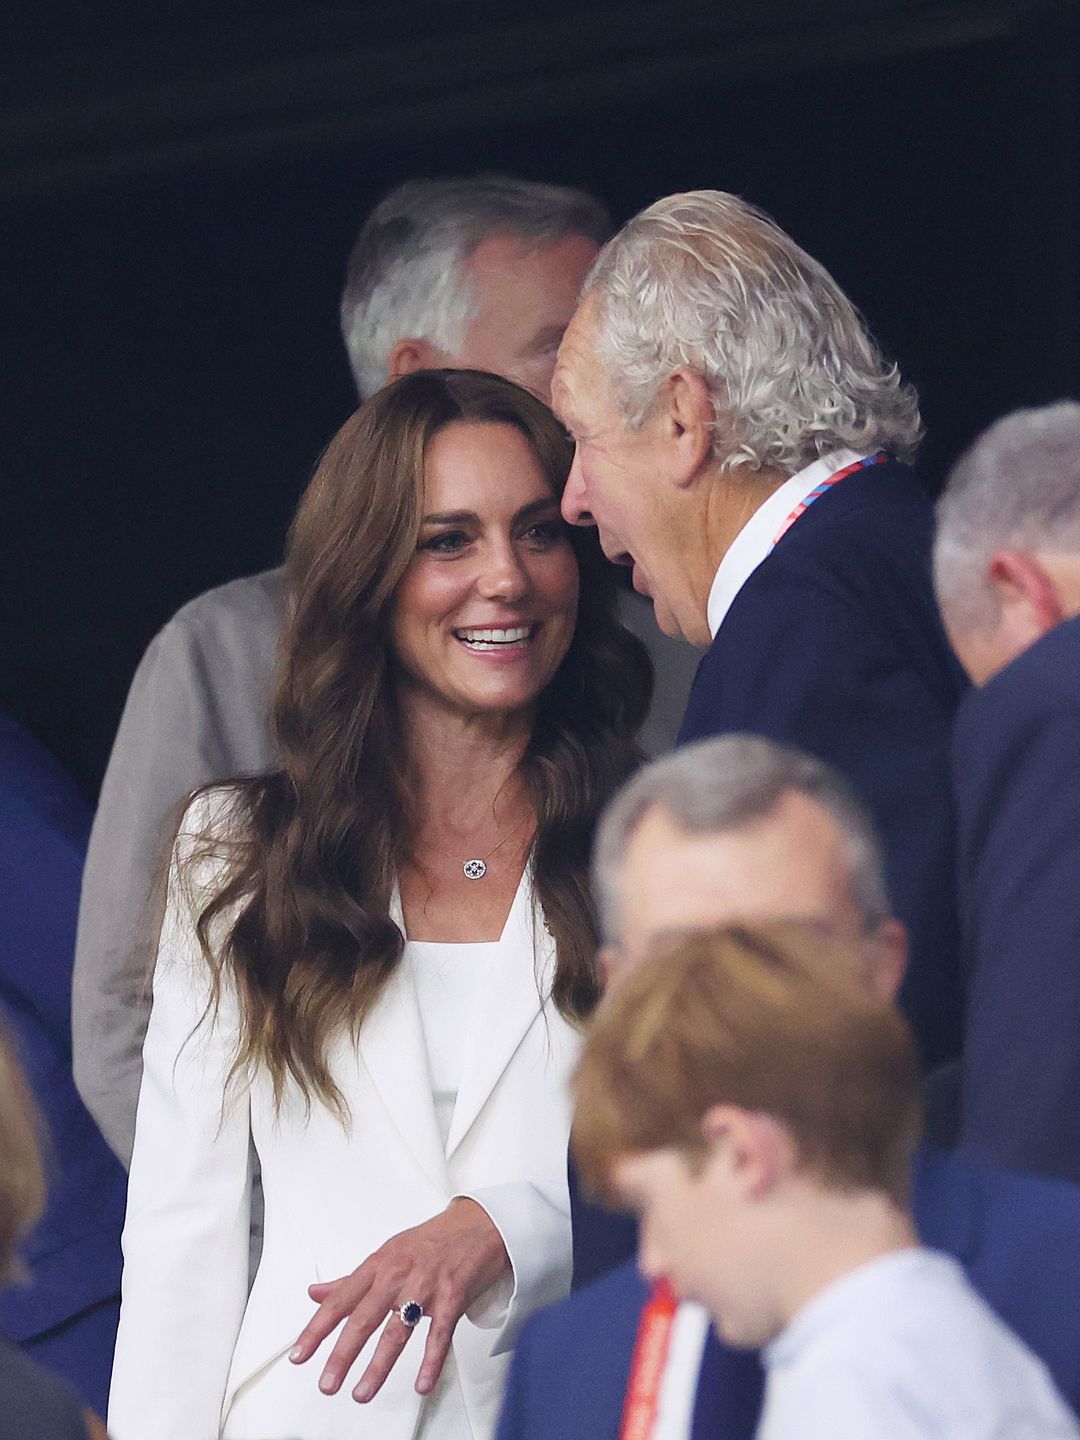 Princess Kate in a white suit in the crowd at the Rugby World Cup